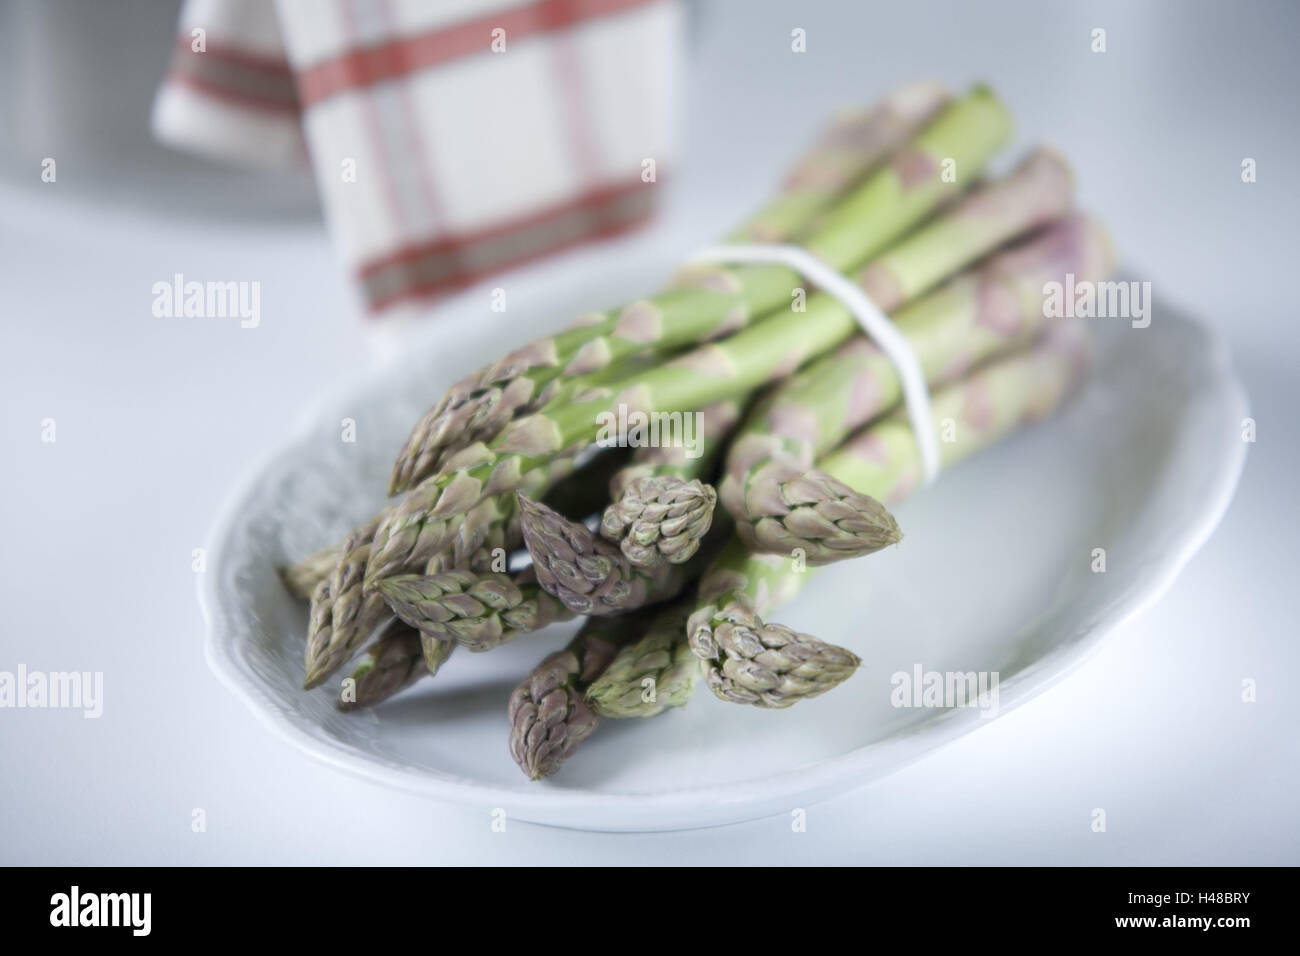 Plate, green asparagus, Stilllife, Food, table, asparagus, vegetables, nutrition, healthy, green, bundled up, raw, preparation, cooking, food, culinary towel, lying, Stock Photo